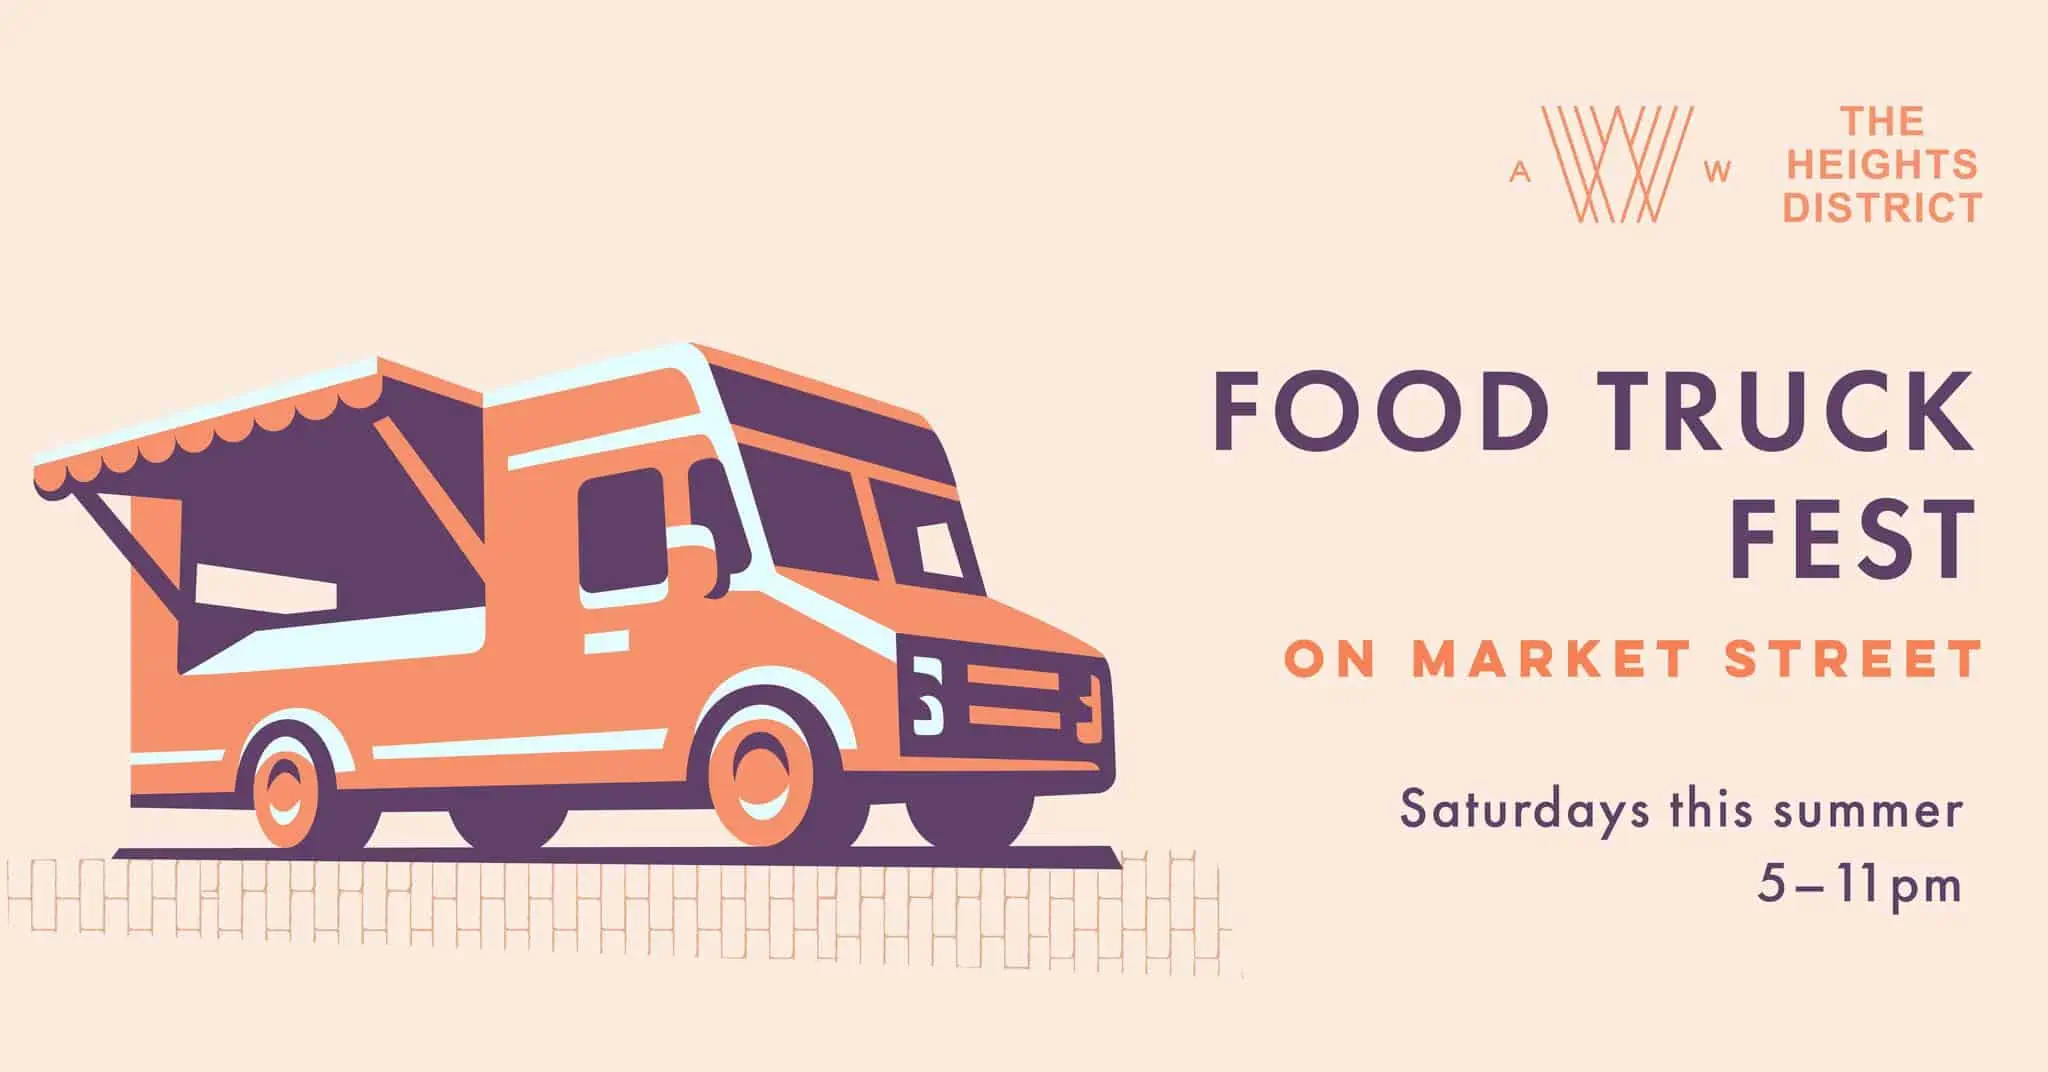 Food Truck on Market Street every Saturday this Summer from 5pm-11pm